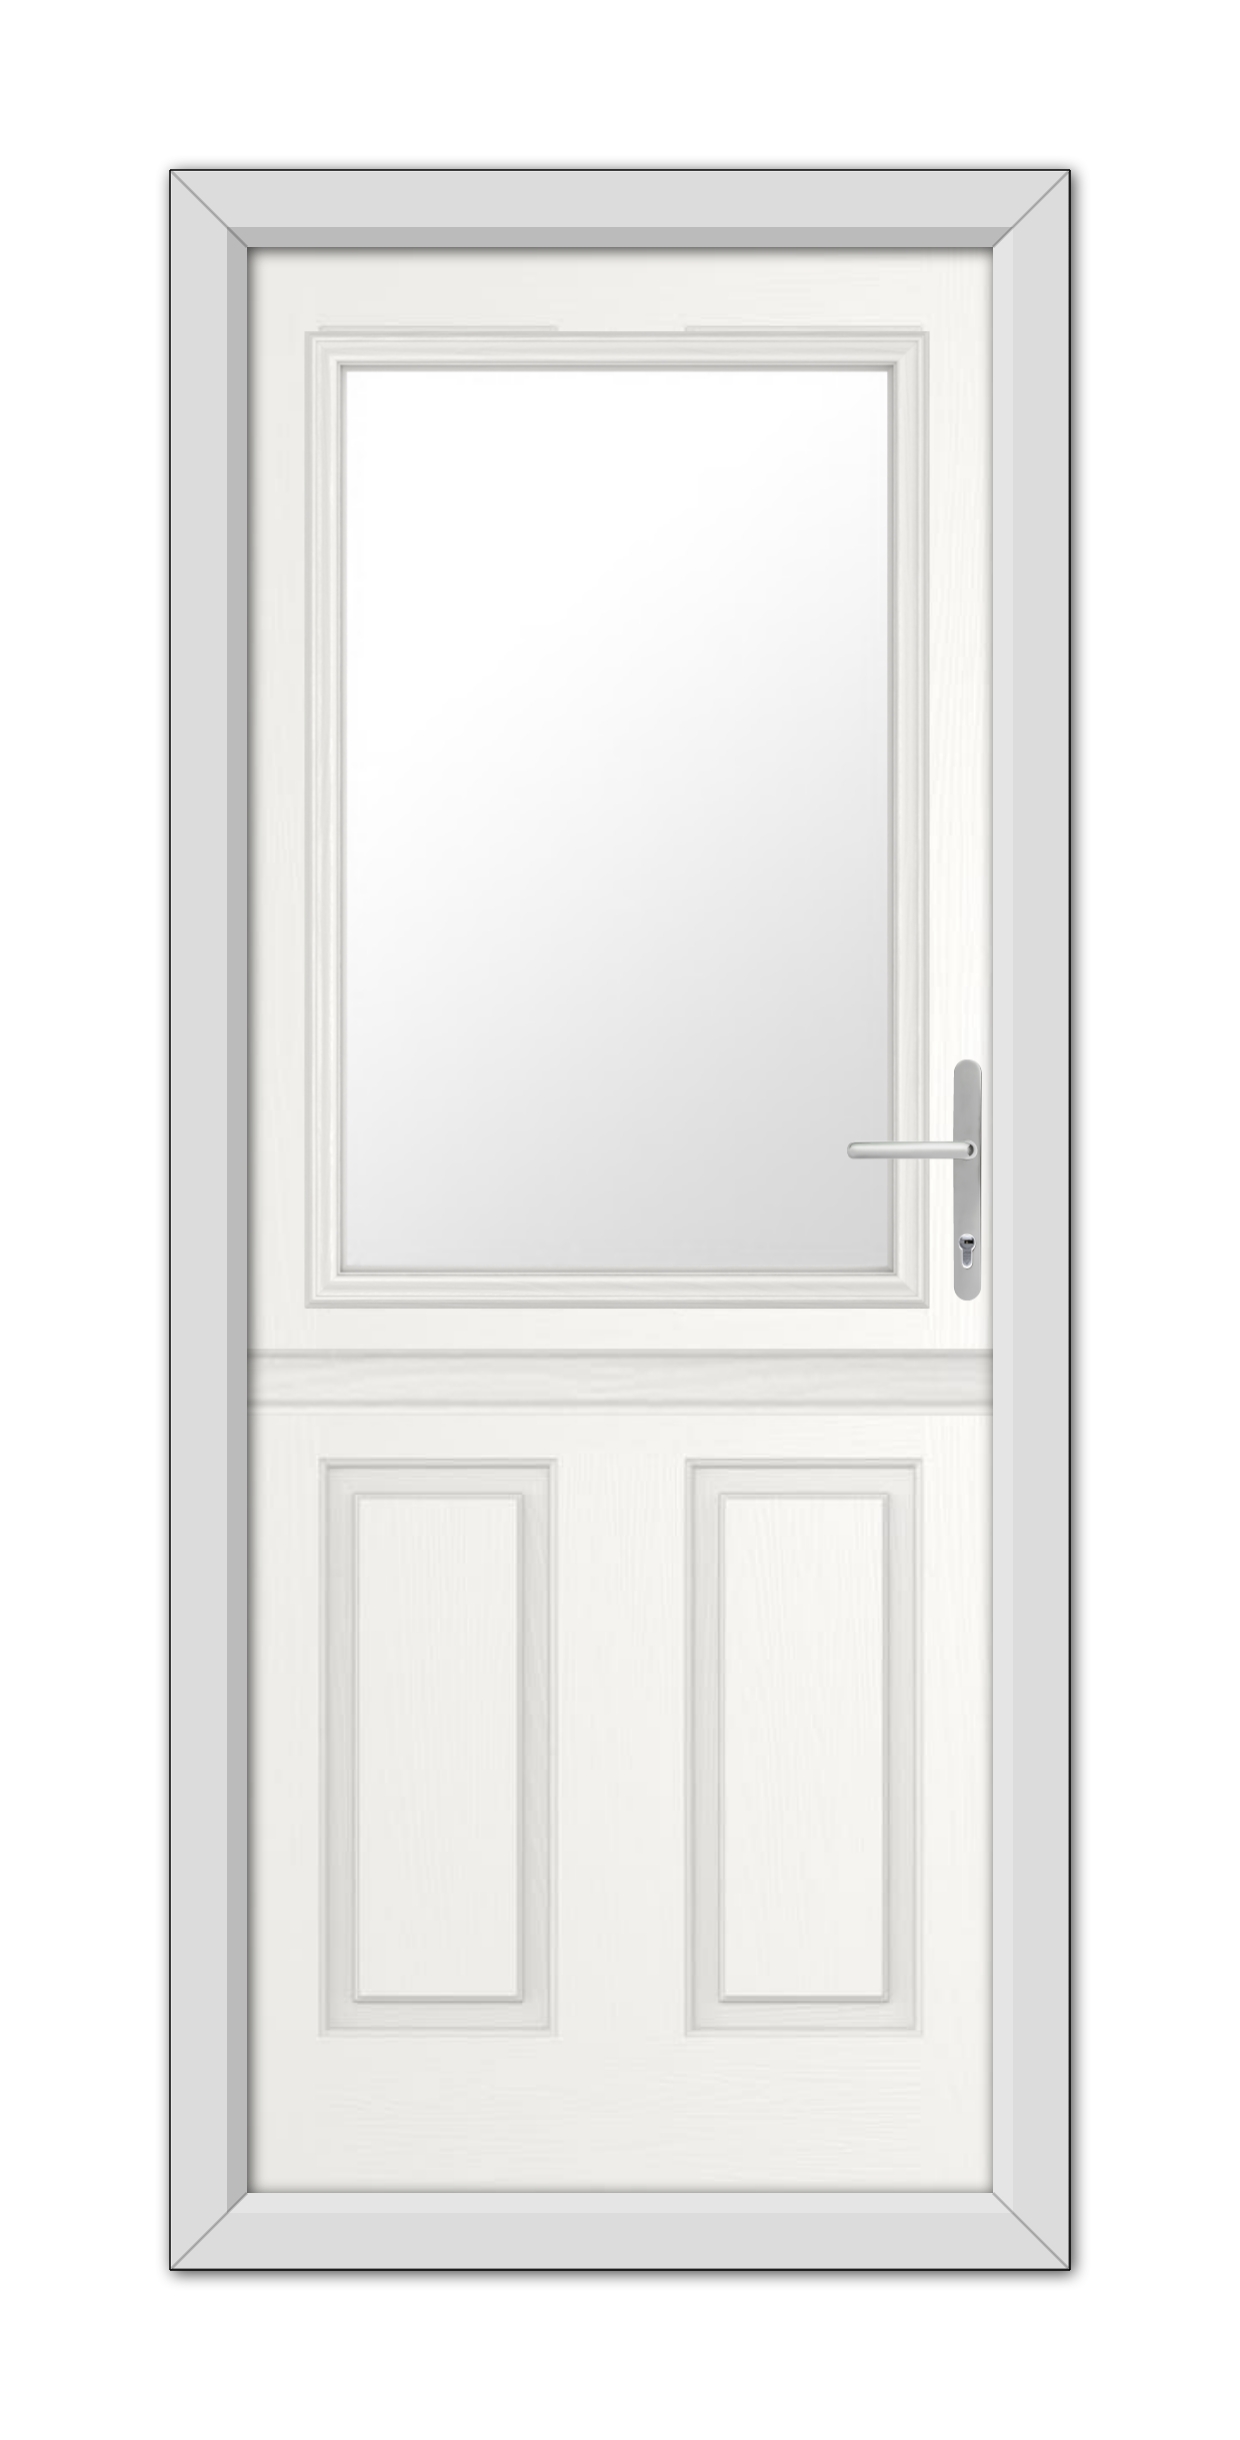 A White Buxton Stable Composite Door 48mm Timber Core with a glass panel on the top half, metal handle on the right, and framed by a plain white doorframe.